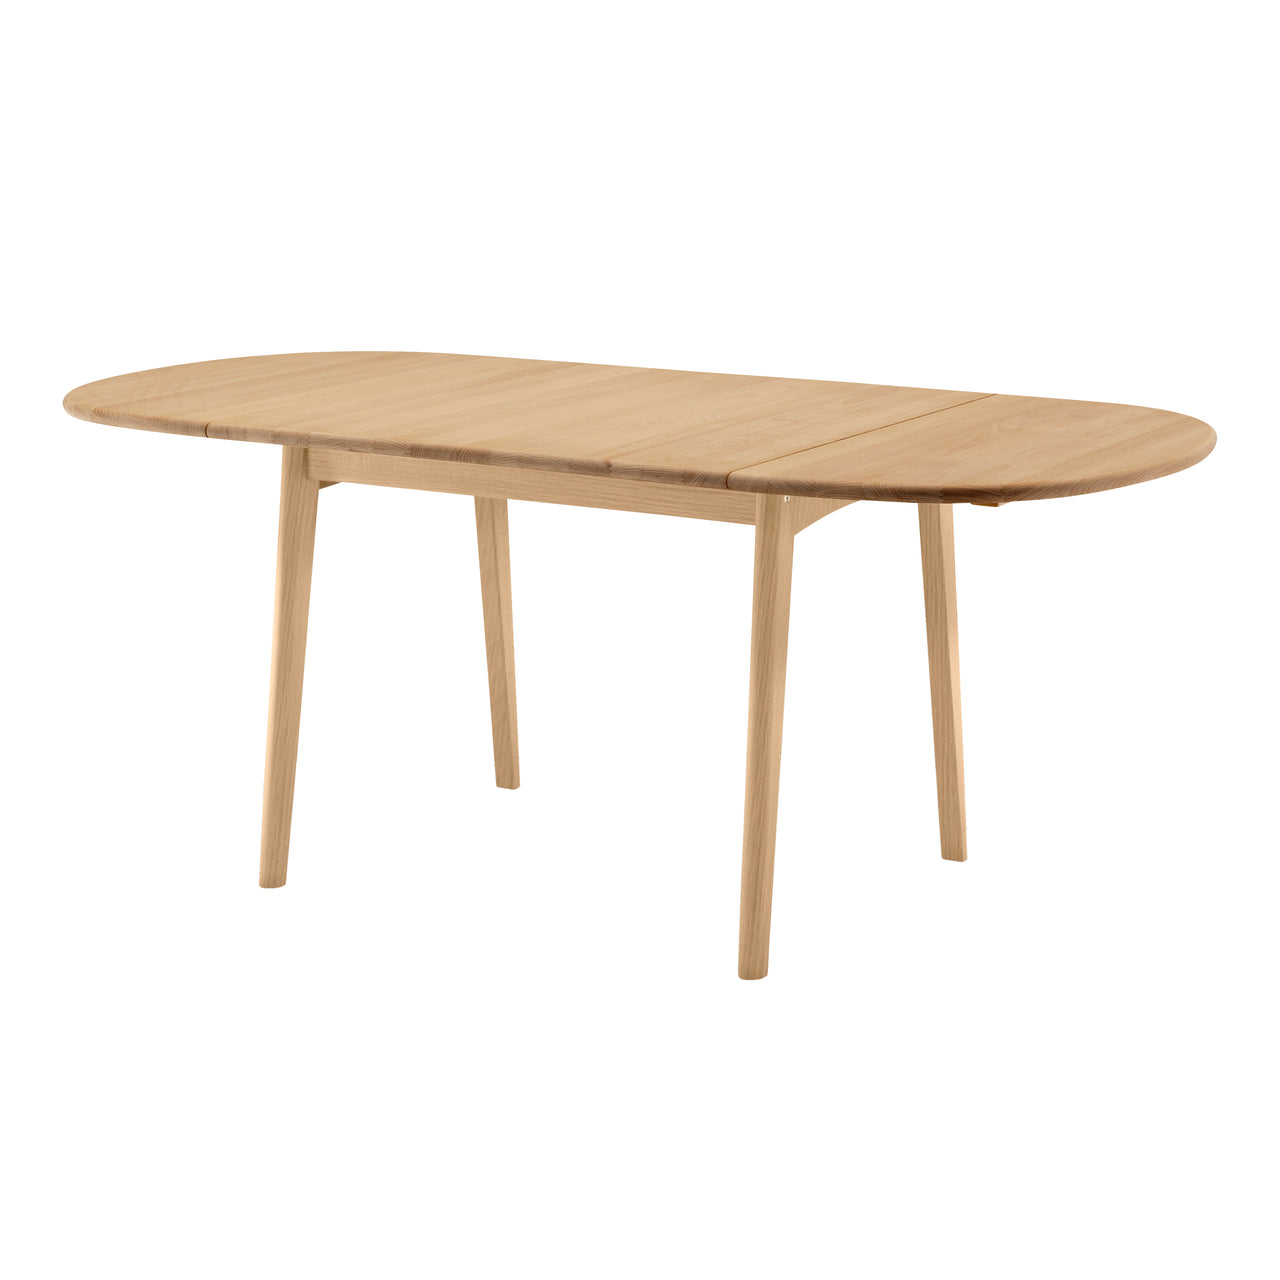 CH002 Dining Table: Oiled Oak